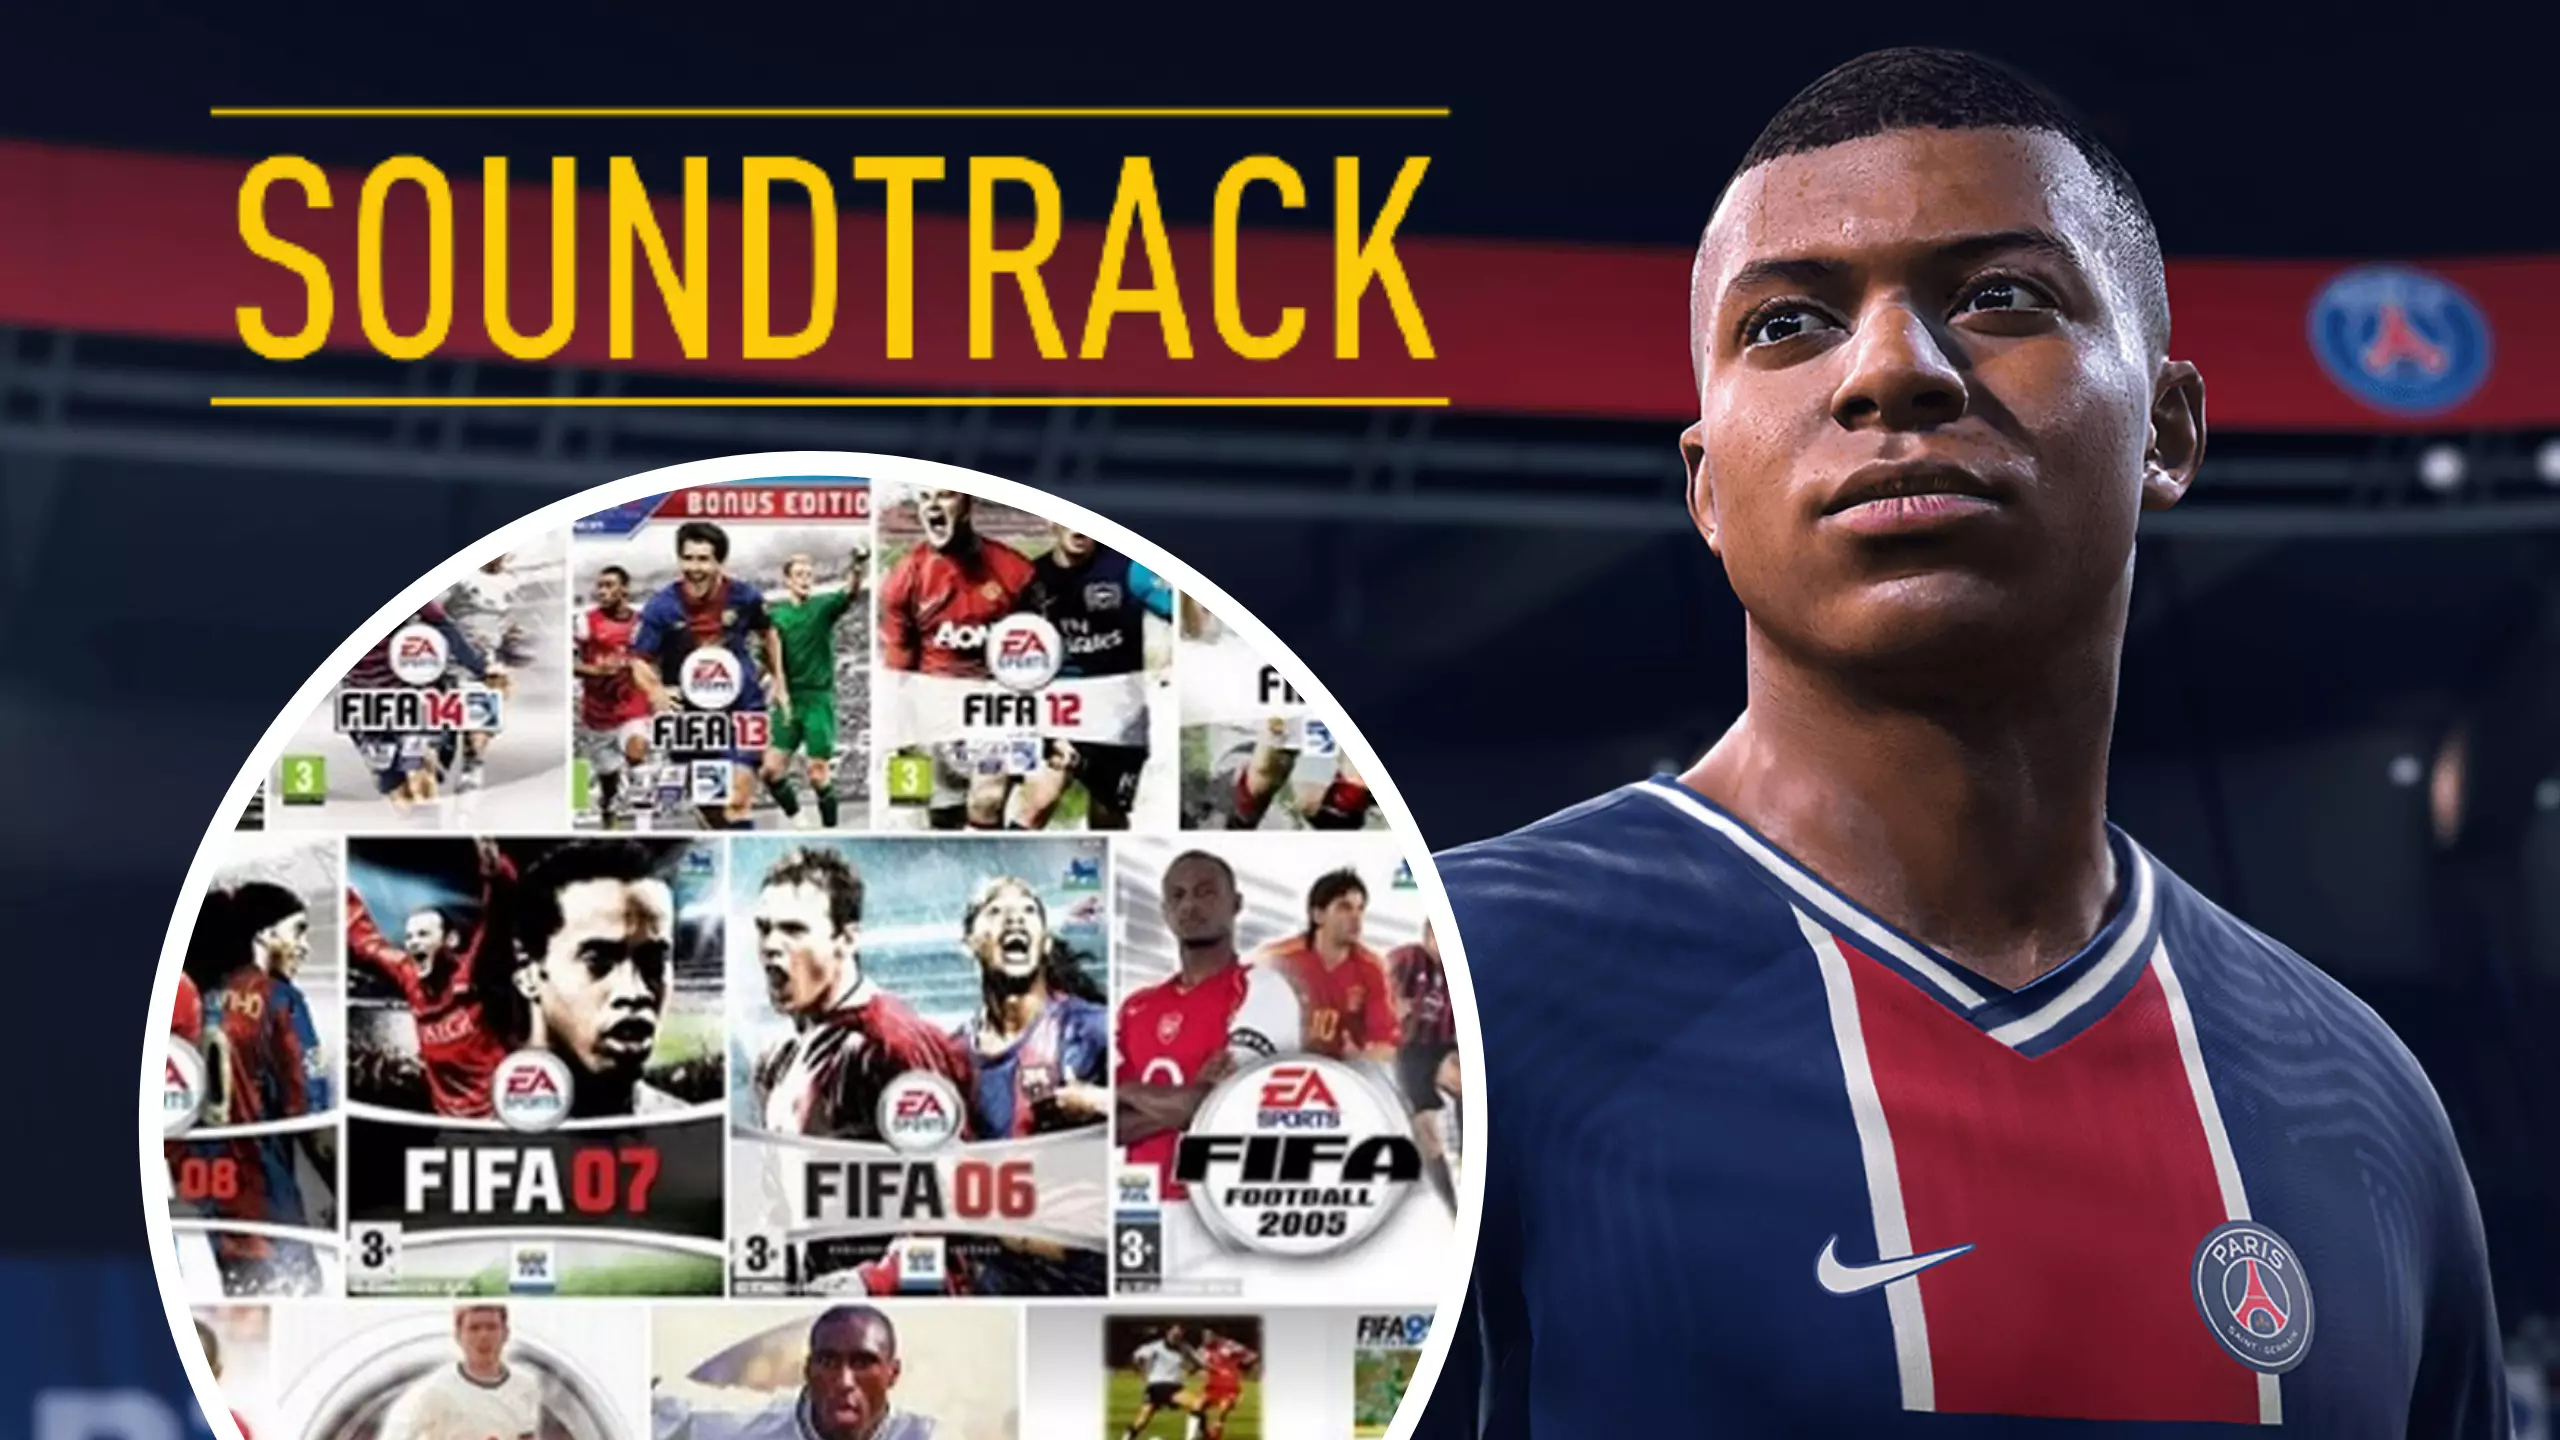 Incredible 'Best FIFA Songs Of All Time' Thread Features Some Absolute Bangers